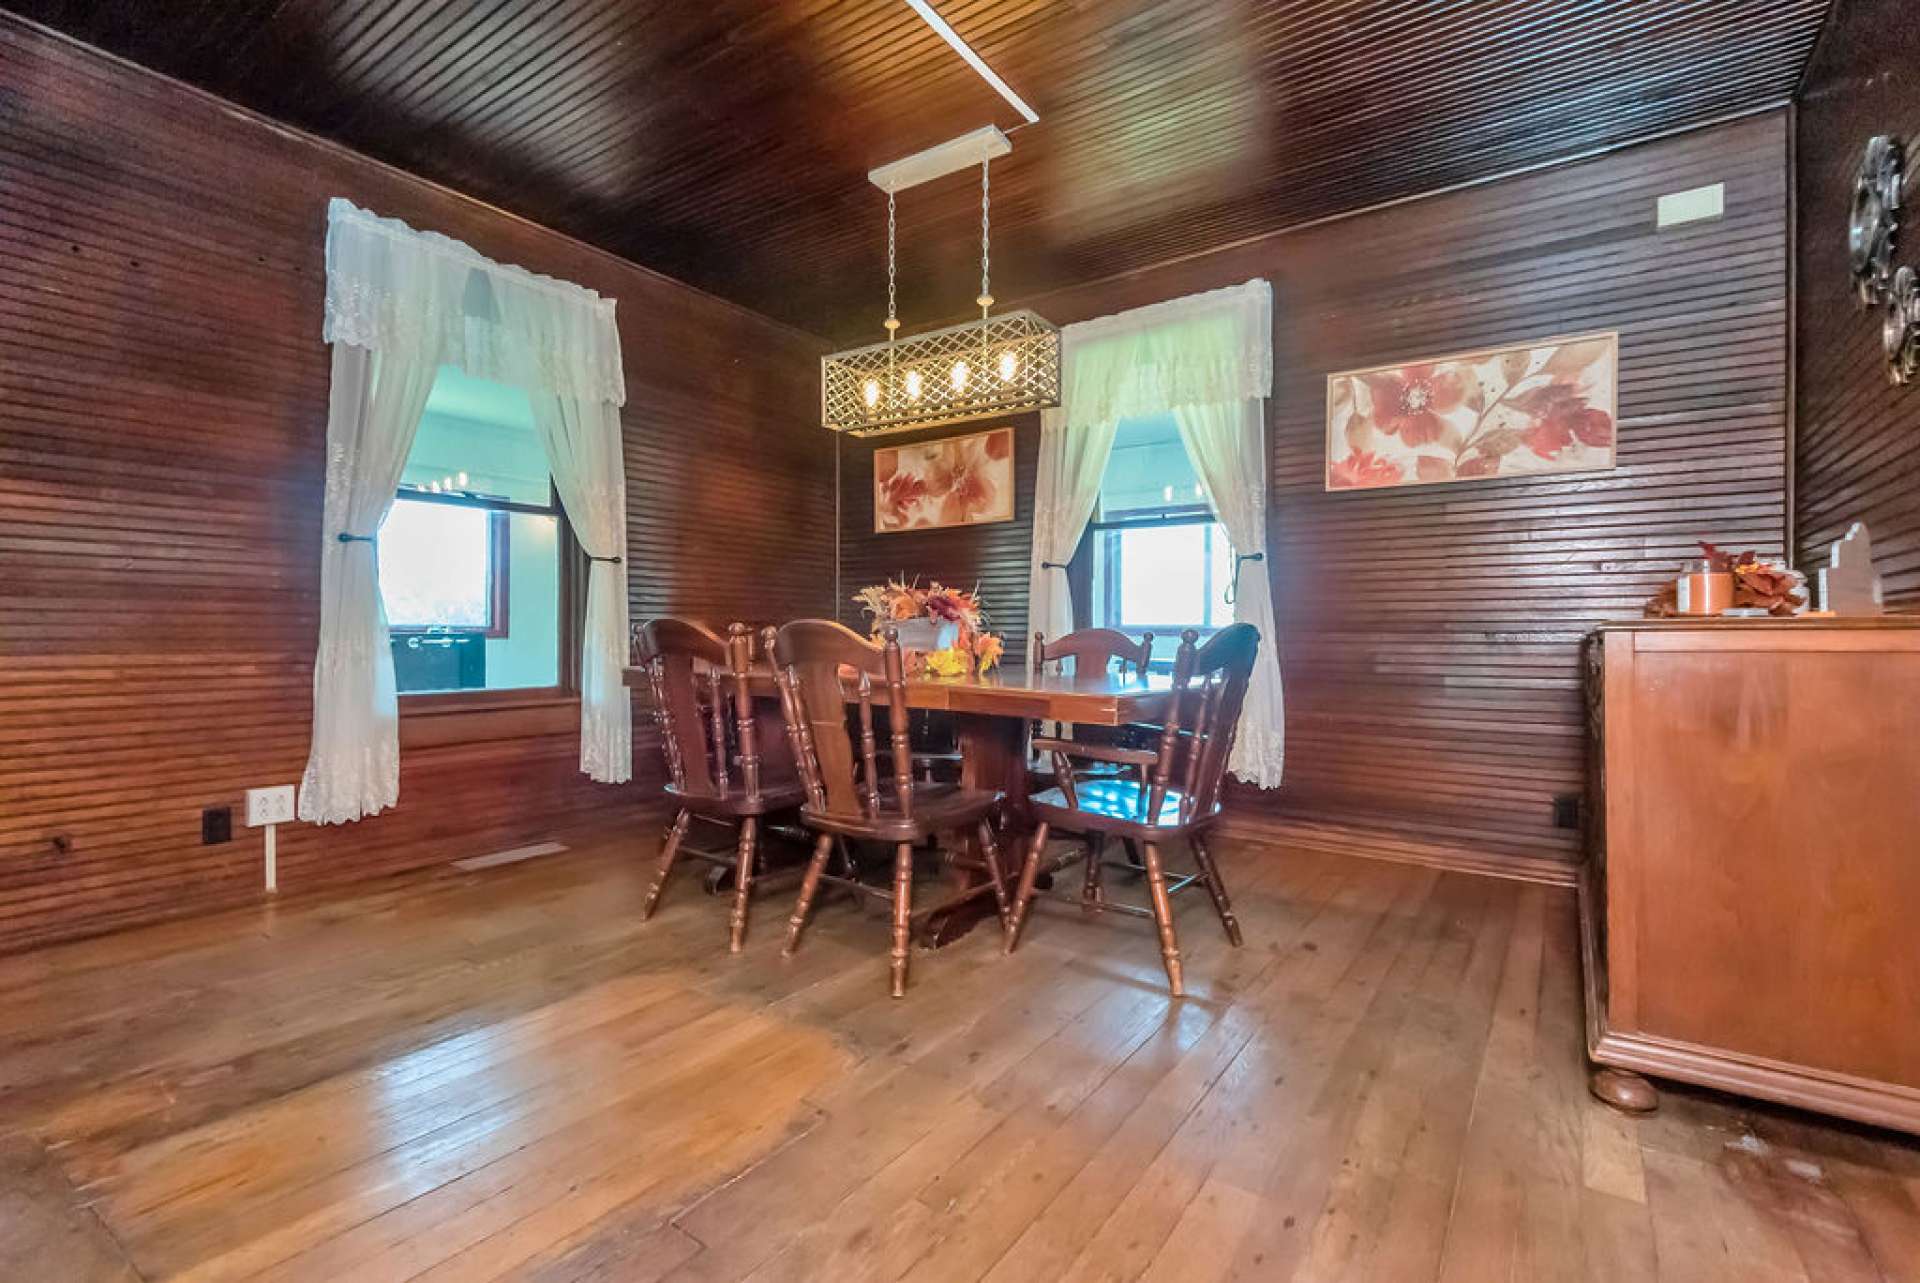 You will be excited to host your family, friends and neighbors in this spacious dining room.